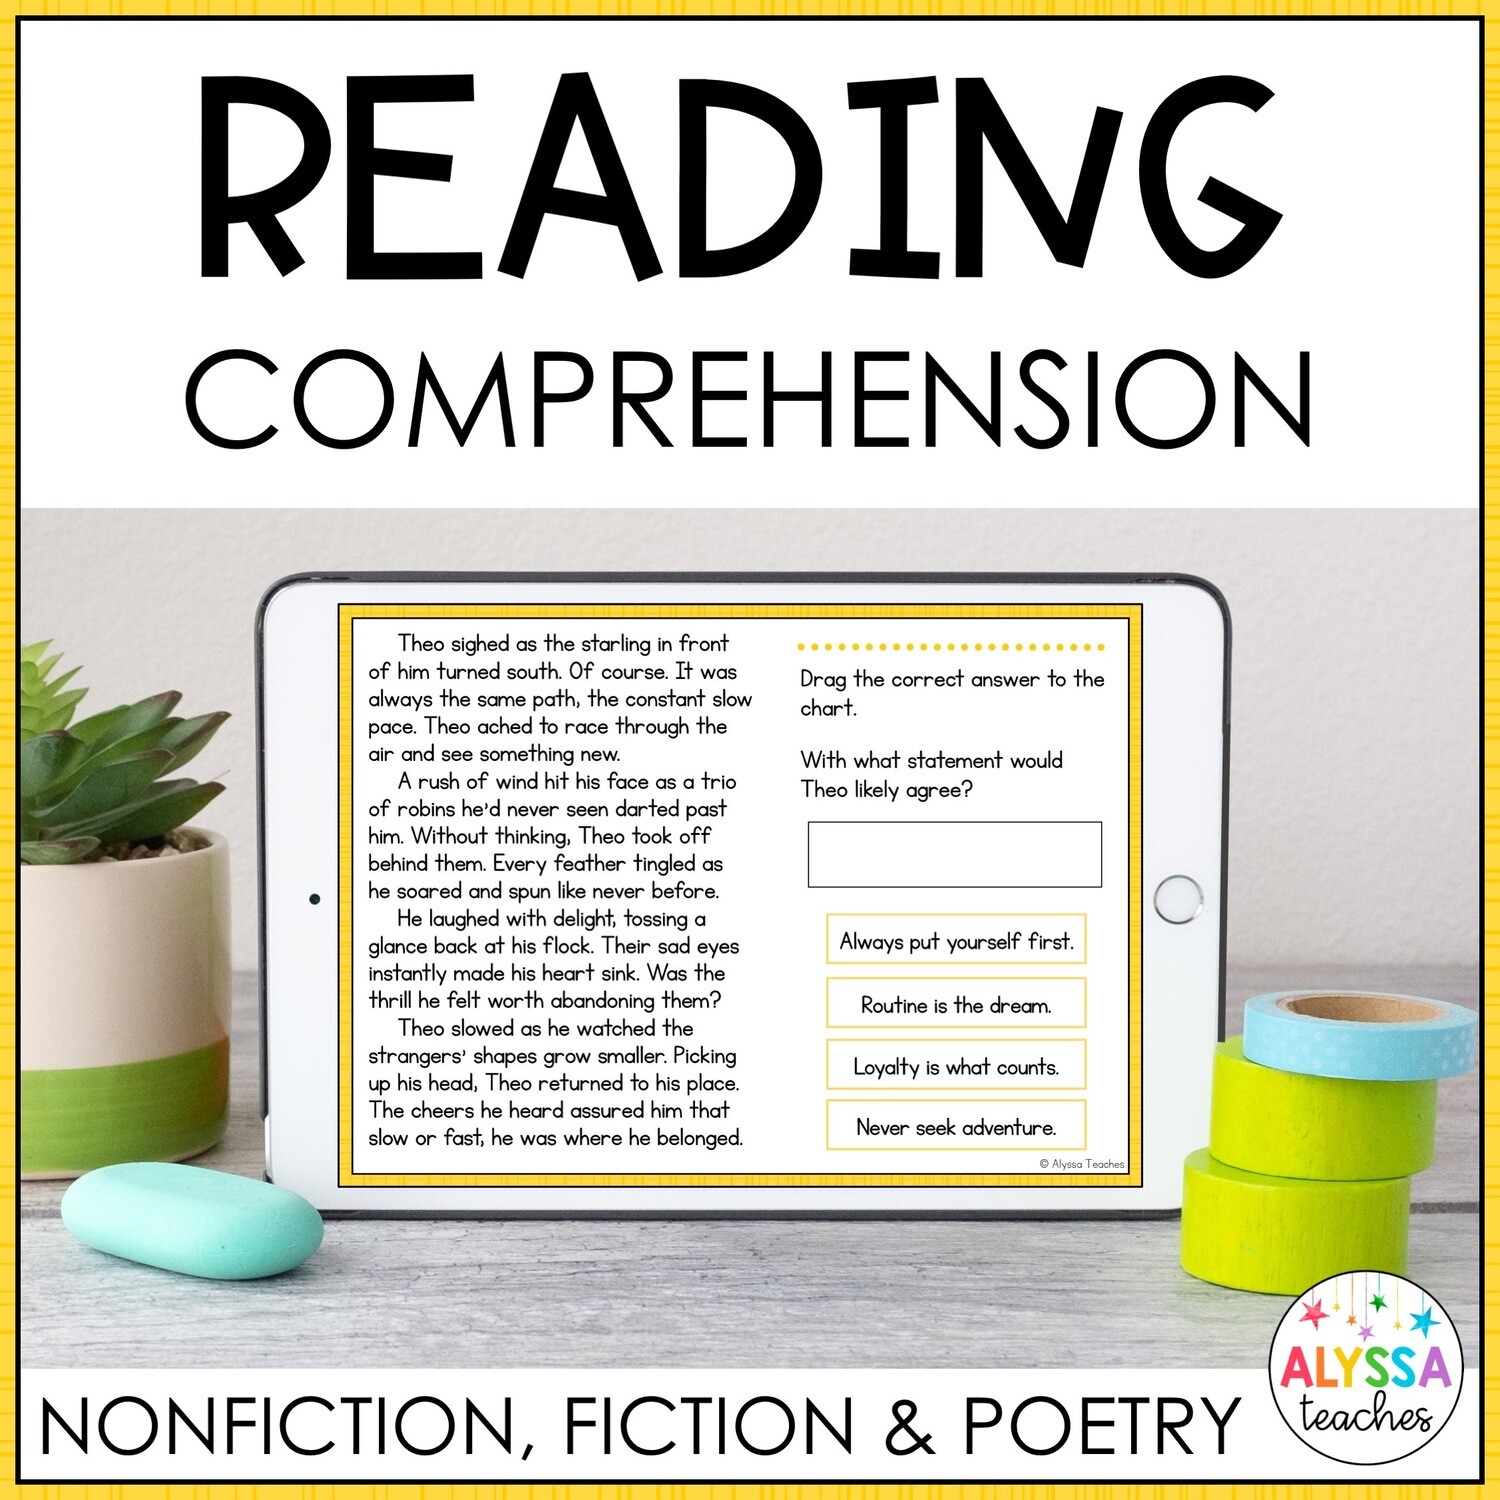 Nonfiction, Fiction, and Poetry Reading Comprehension Bundle | Digital and Print